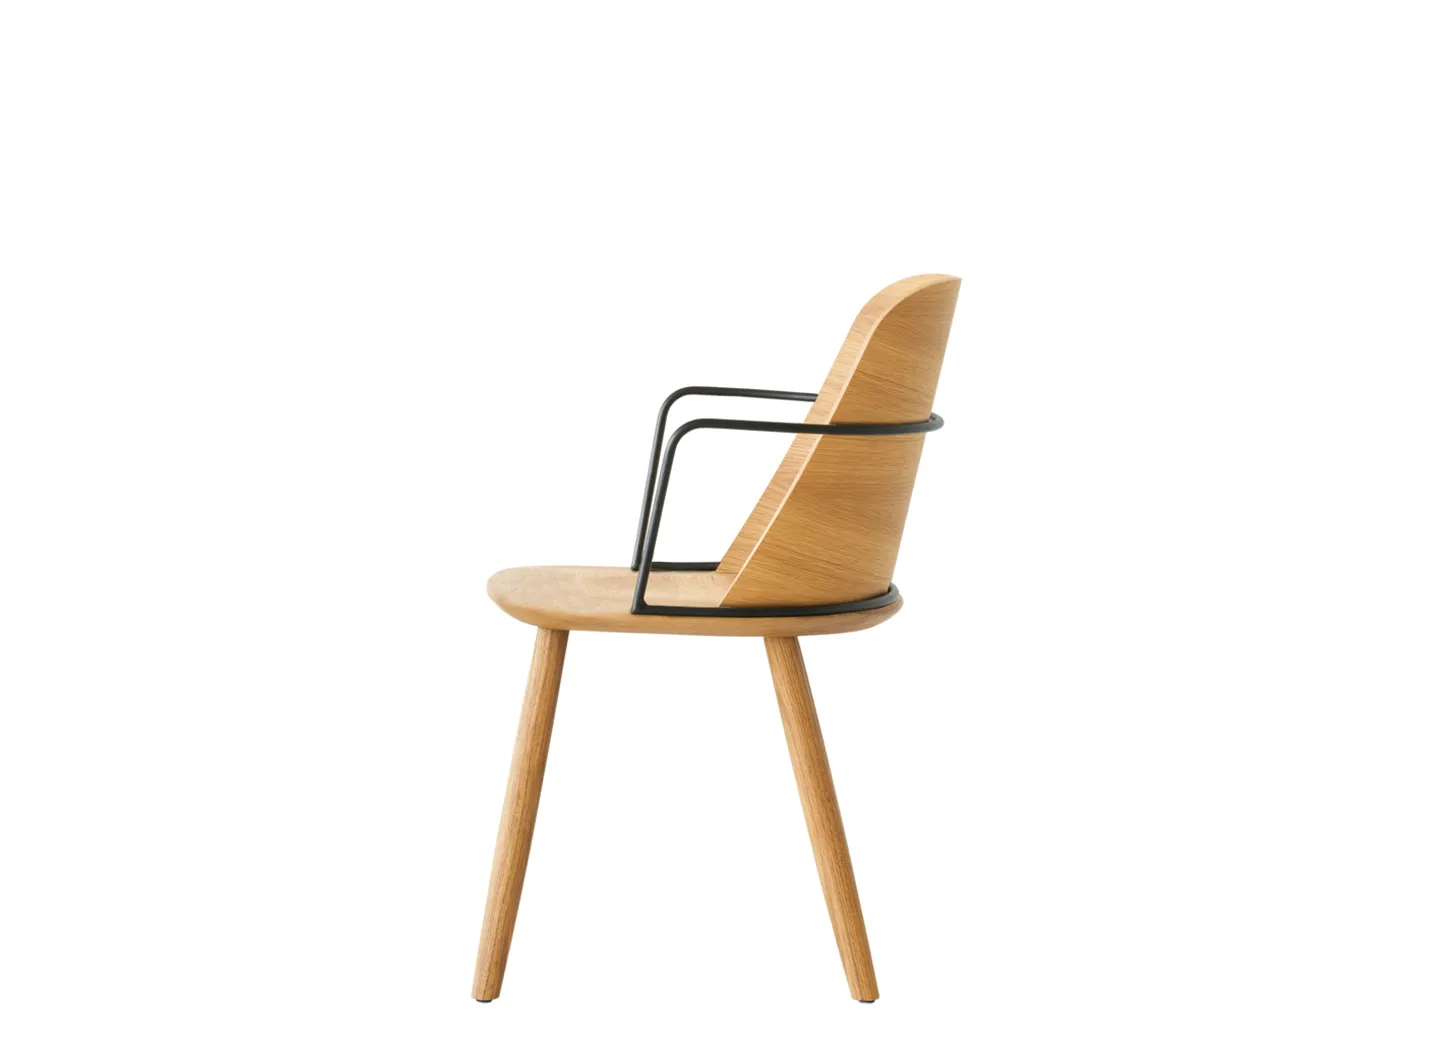  solid wood chair